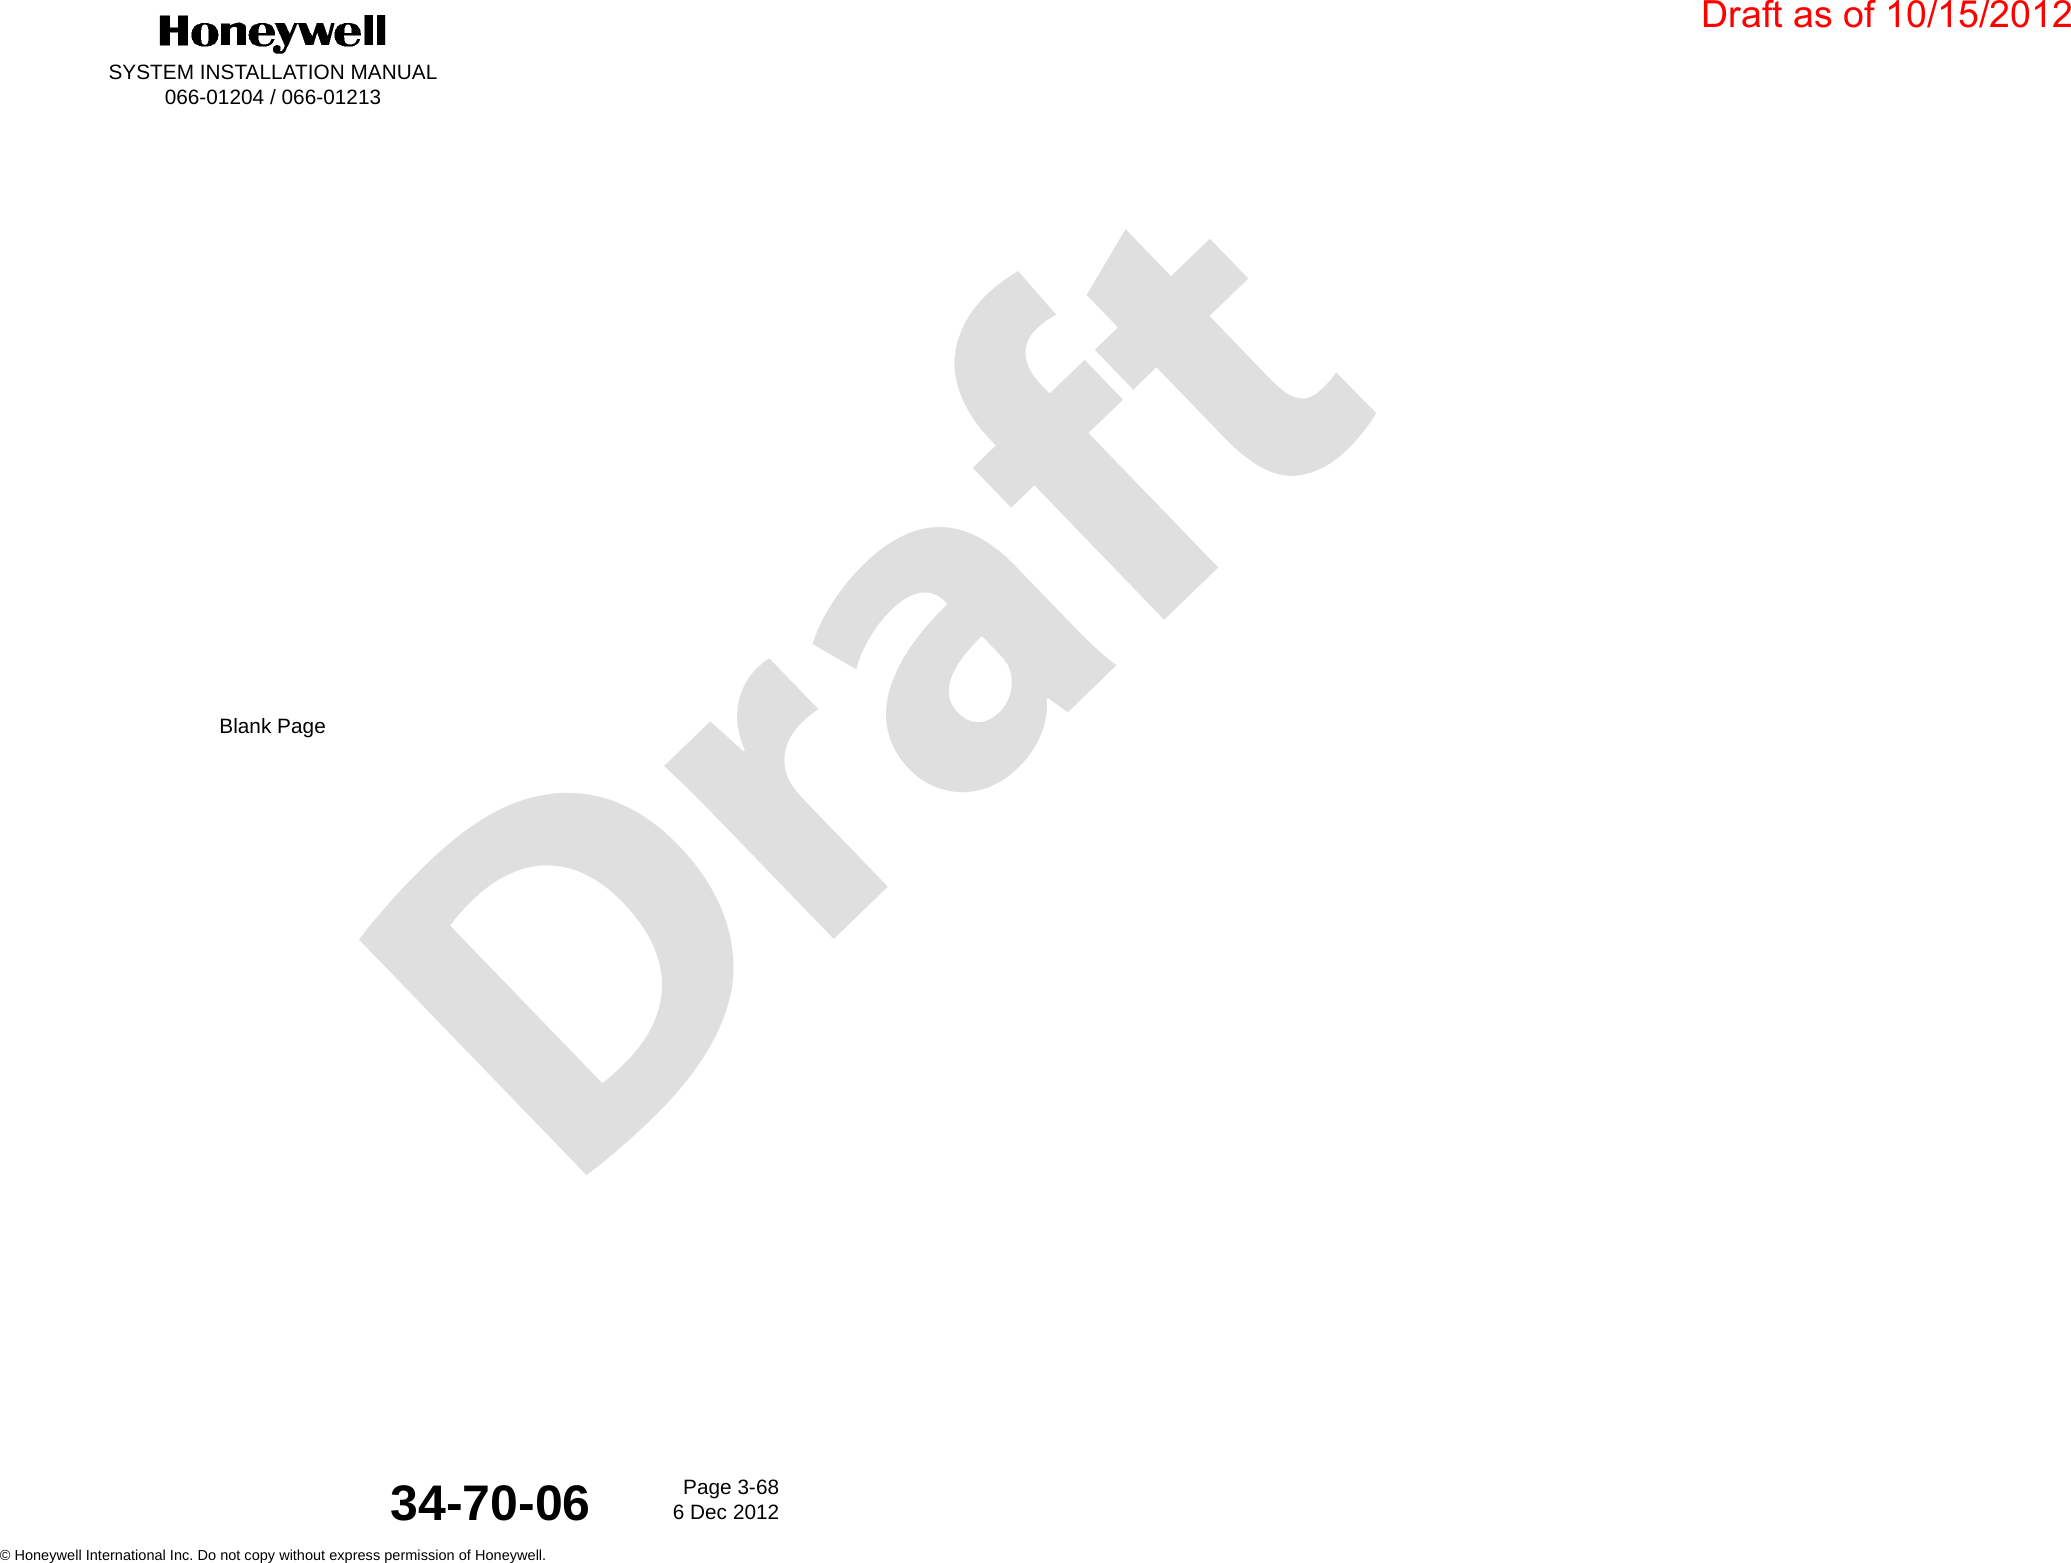 DraftSYSTEM INSTALLATION MANUAL066-01204 / 066-01213Page 3-686 Dec 2012© Honeywell International Inc. Do not copy without express permission of Honeywell.34-70-06Blank PageDraft as of 10/15/2012